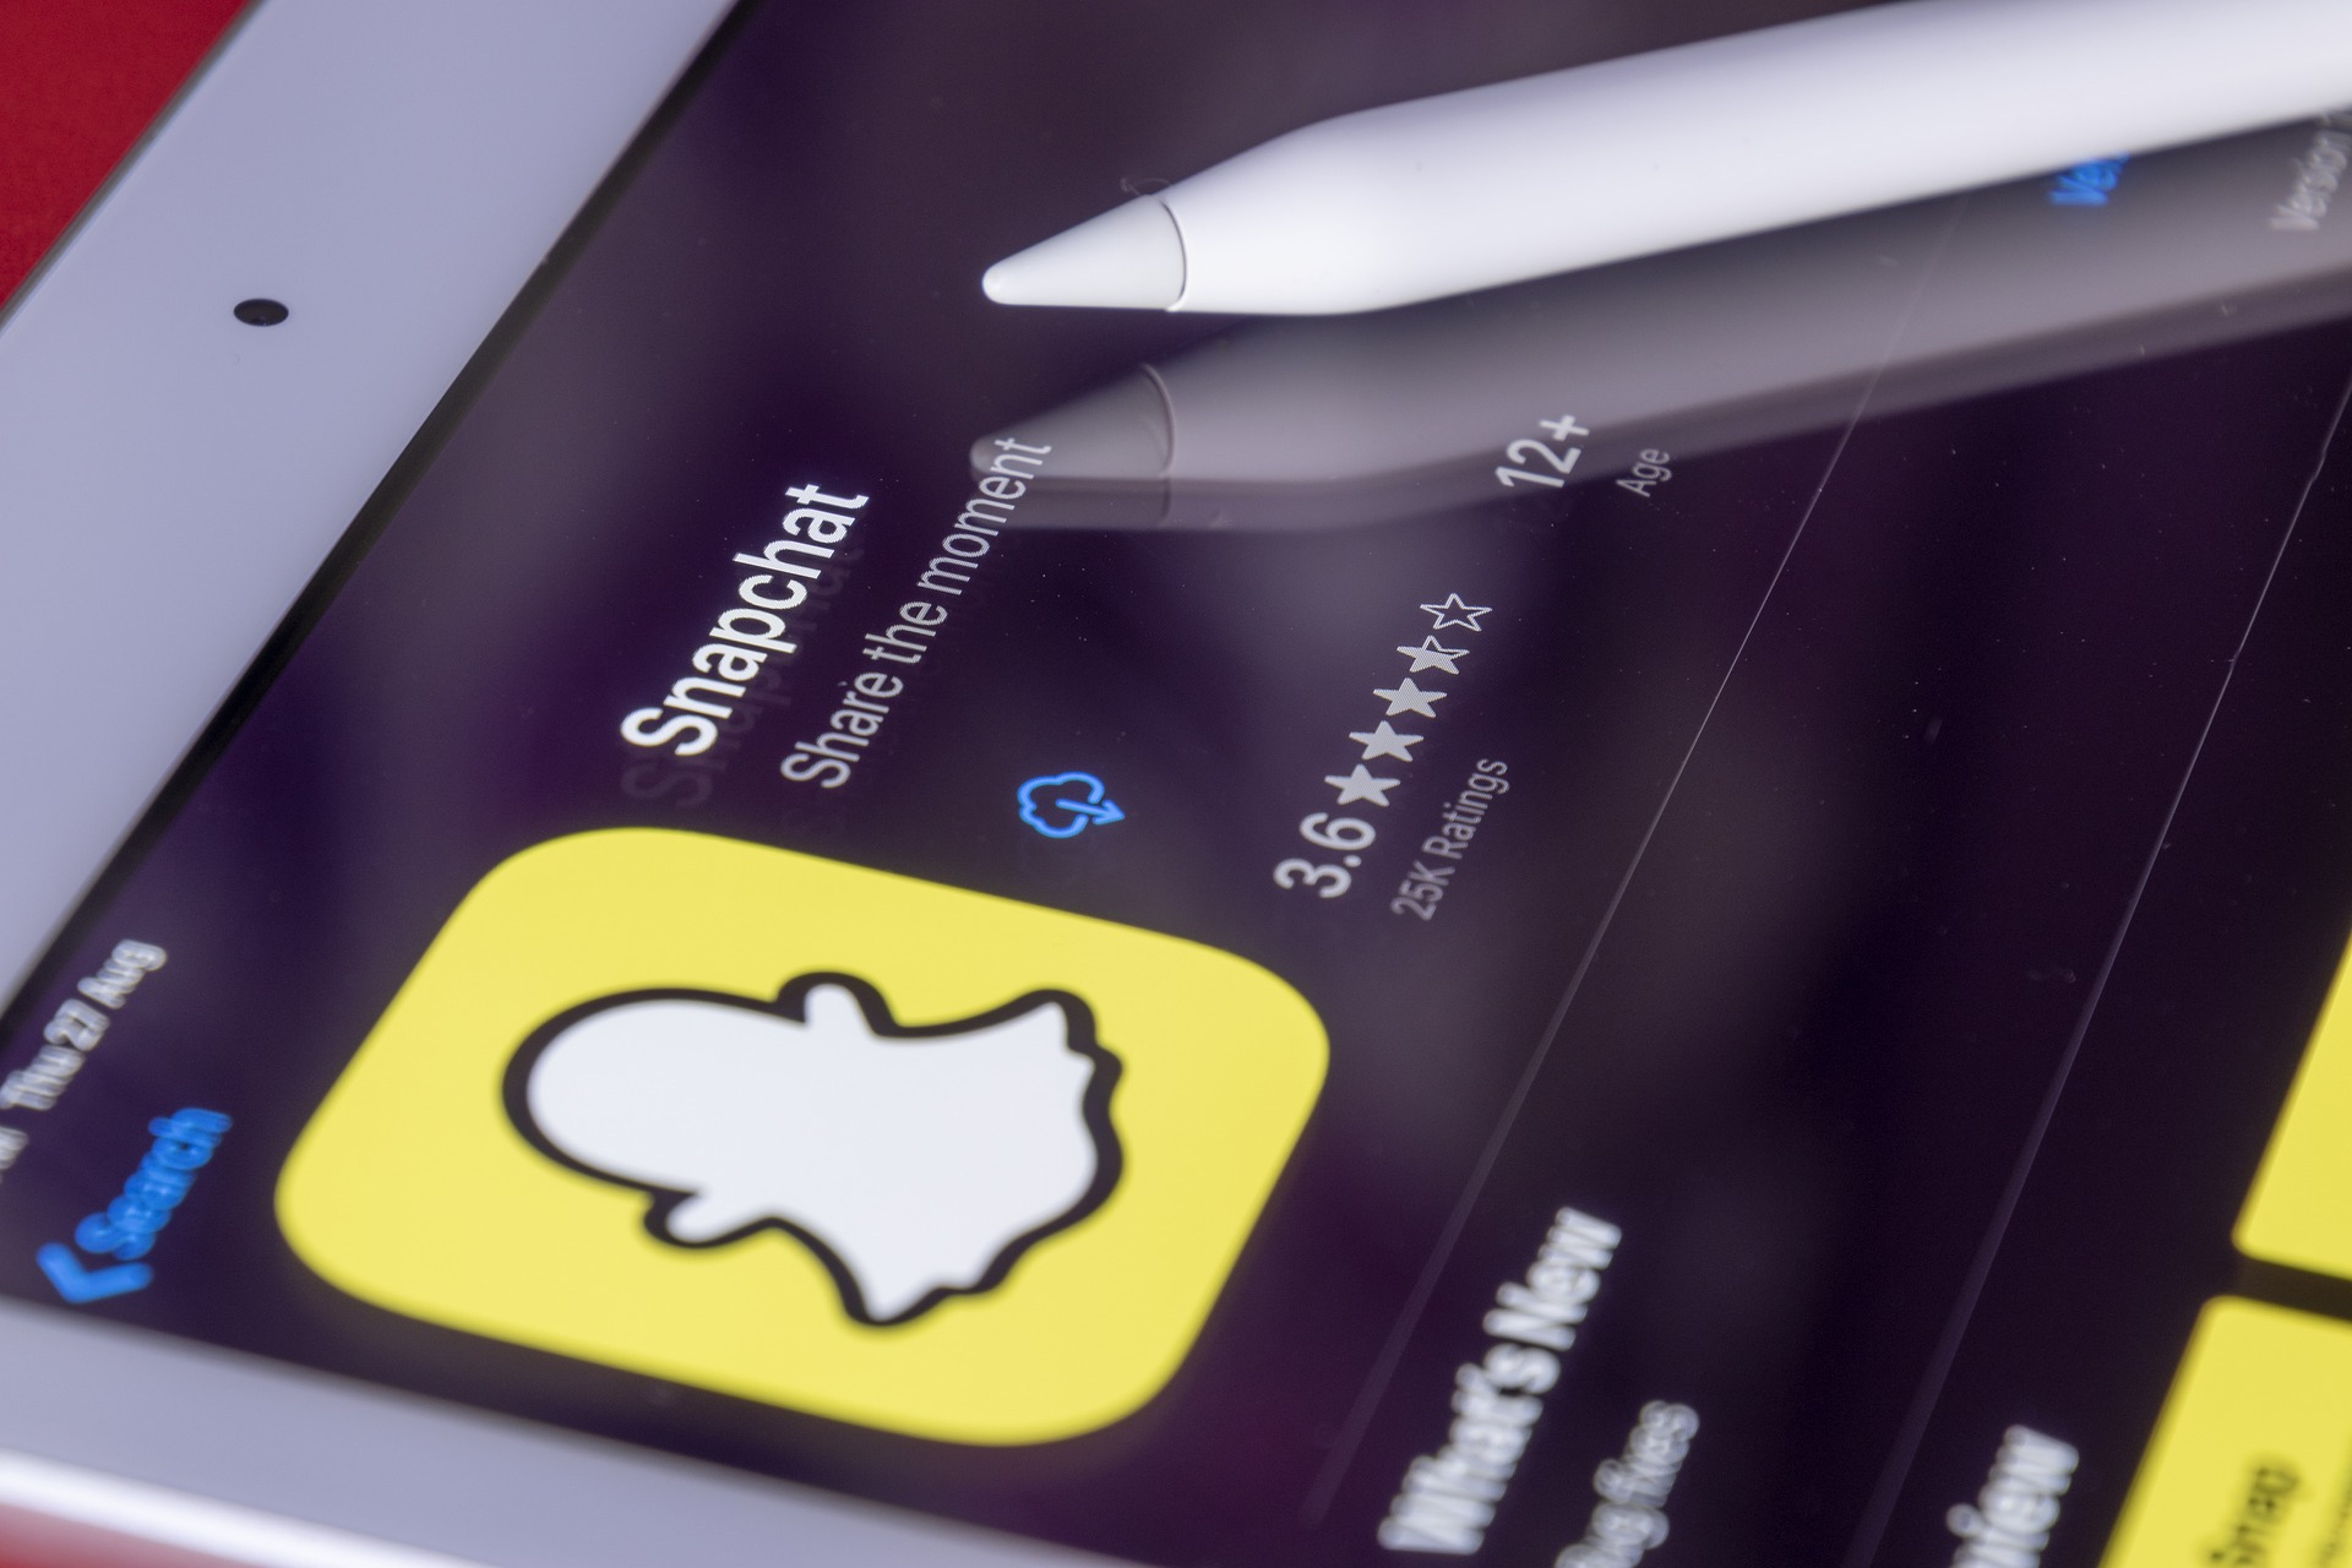 Snap, Meta Have More Downside As Competition, Budget Constraints Weigh, Analysts Say